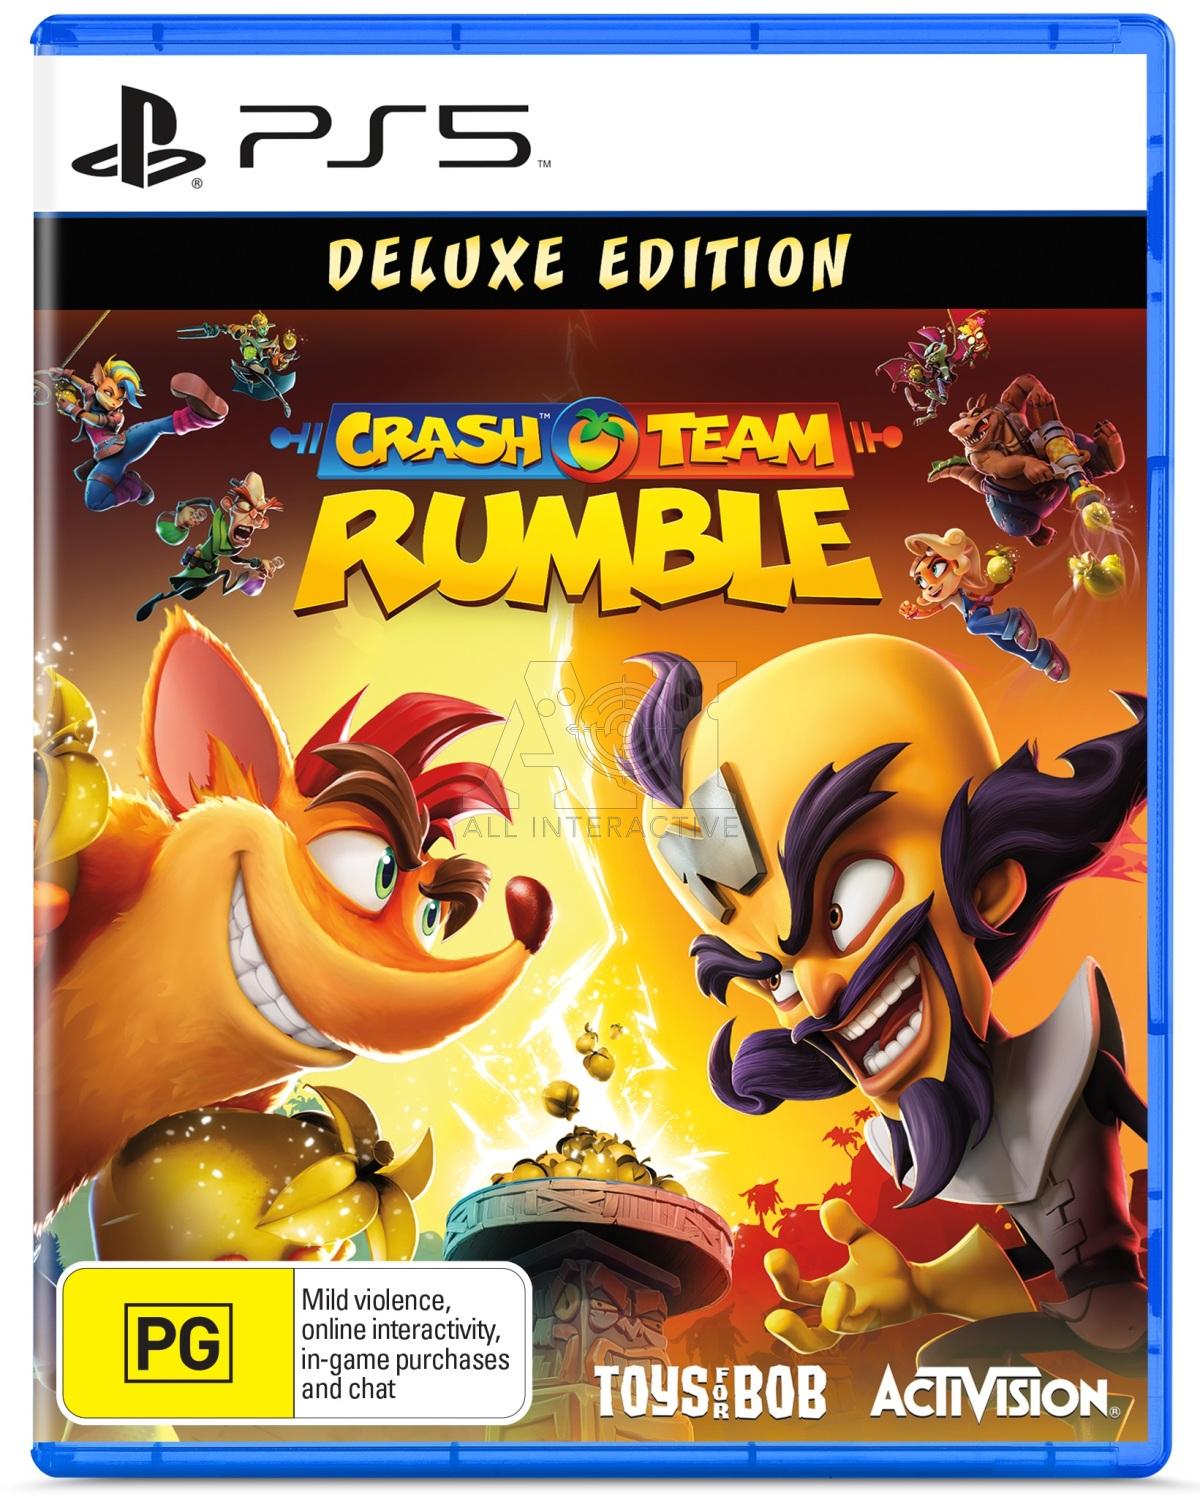 PS5 CRASH TEAM RUMBLE DELUXE EDITION